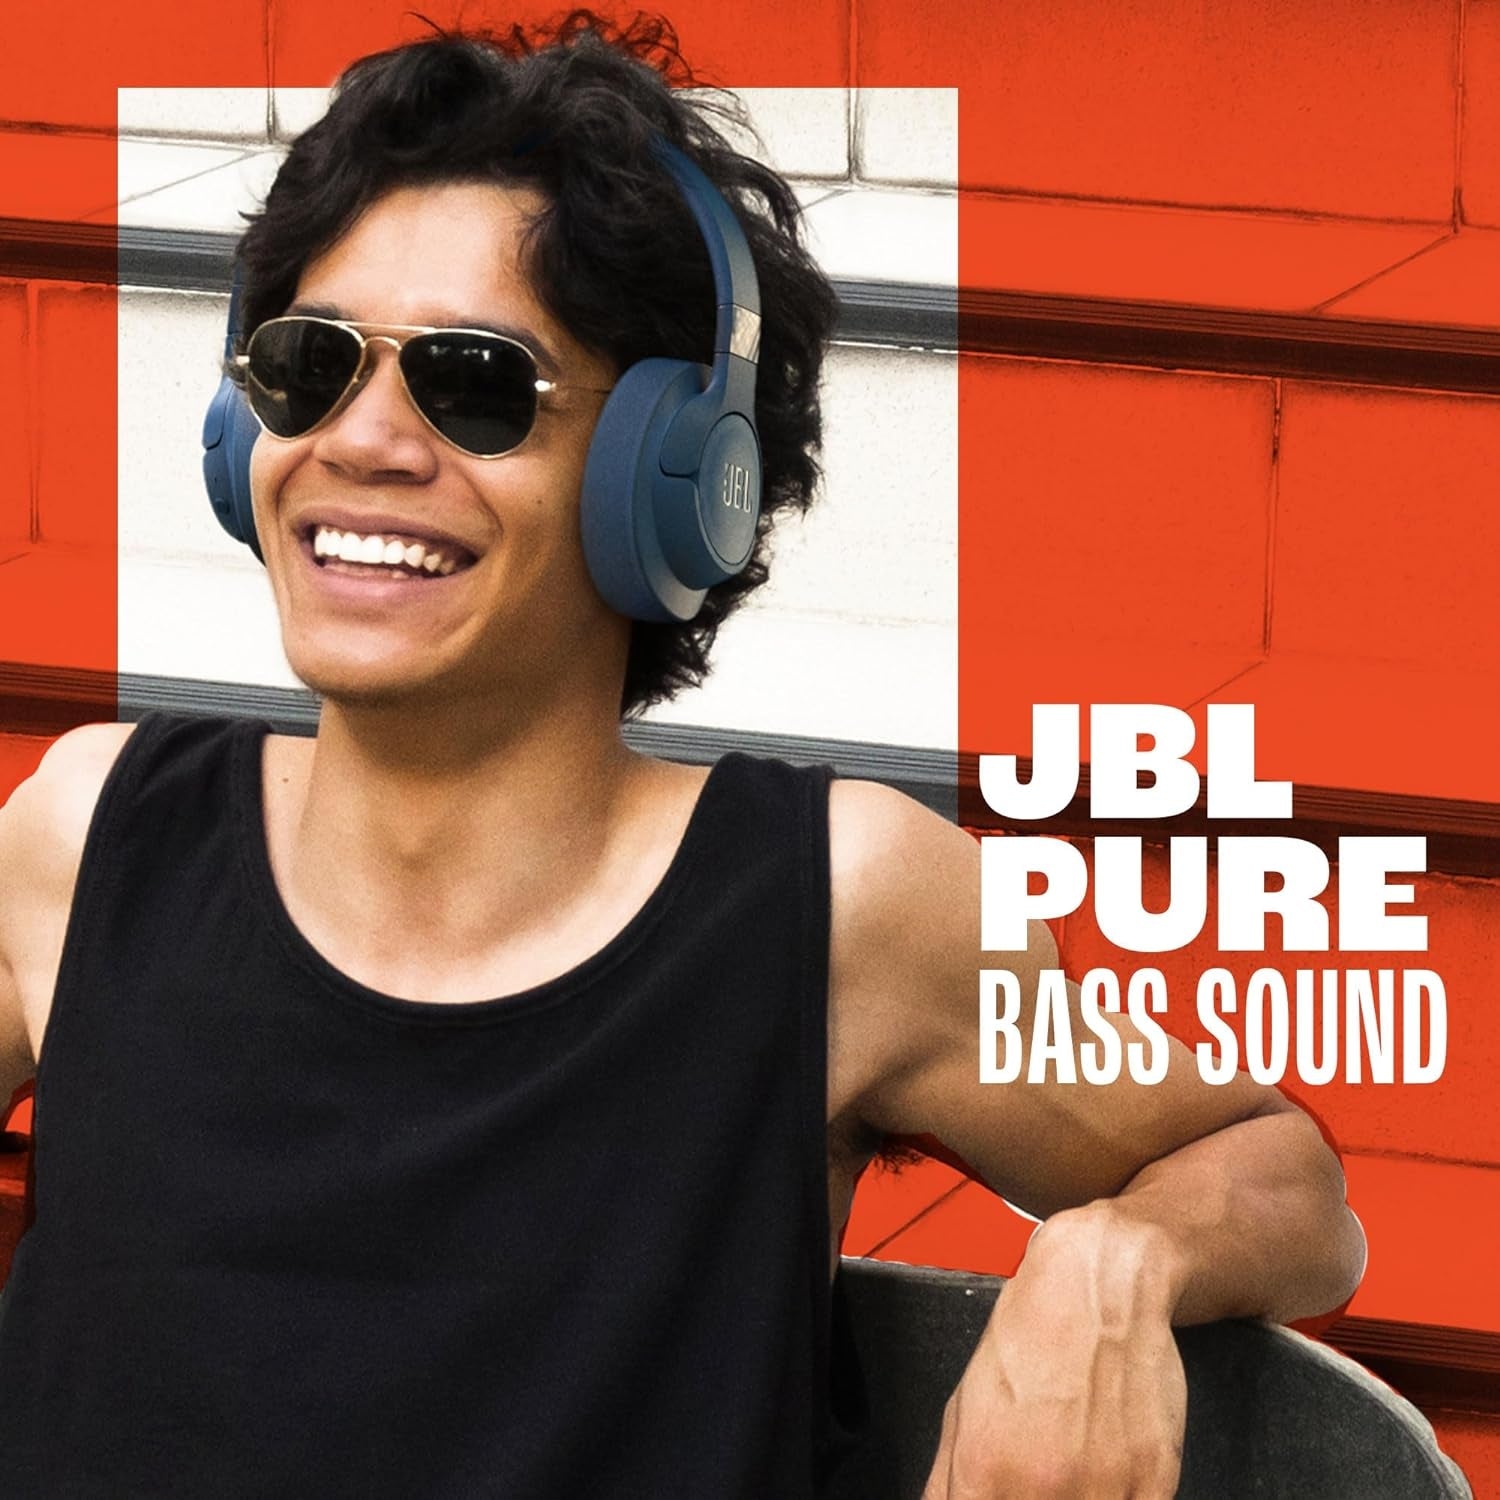 JBL Tune 720BT Wireless Headphones - Pure Bass, Bluetooth 5.3, 76-Hour Battery, Speed Charge - Lightweight & Foldable Design - White